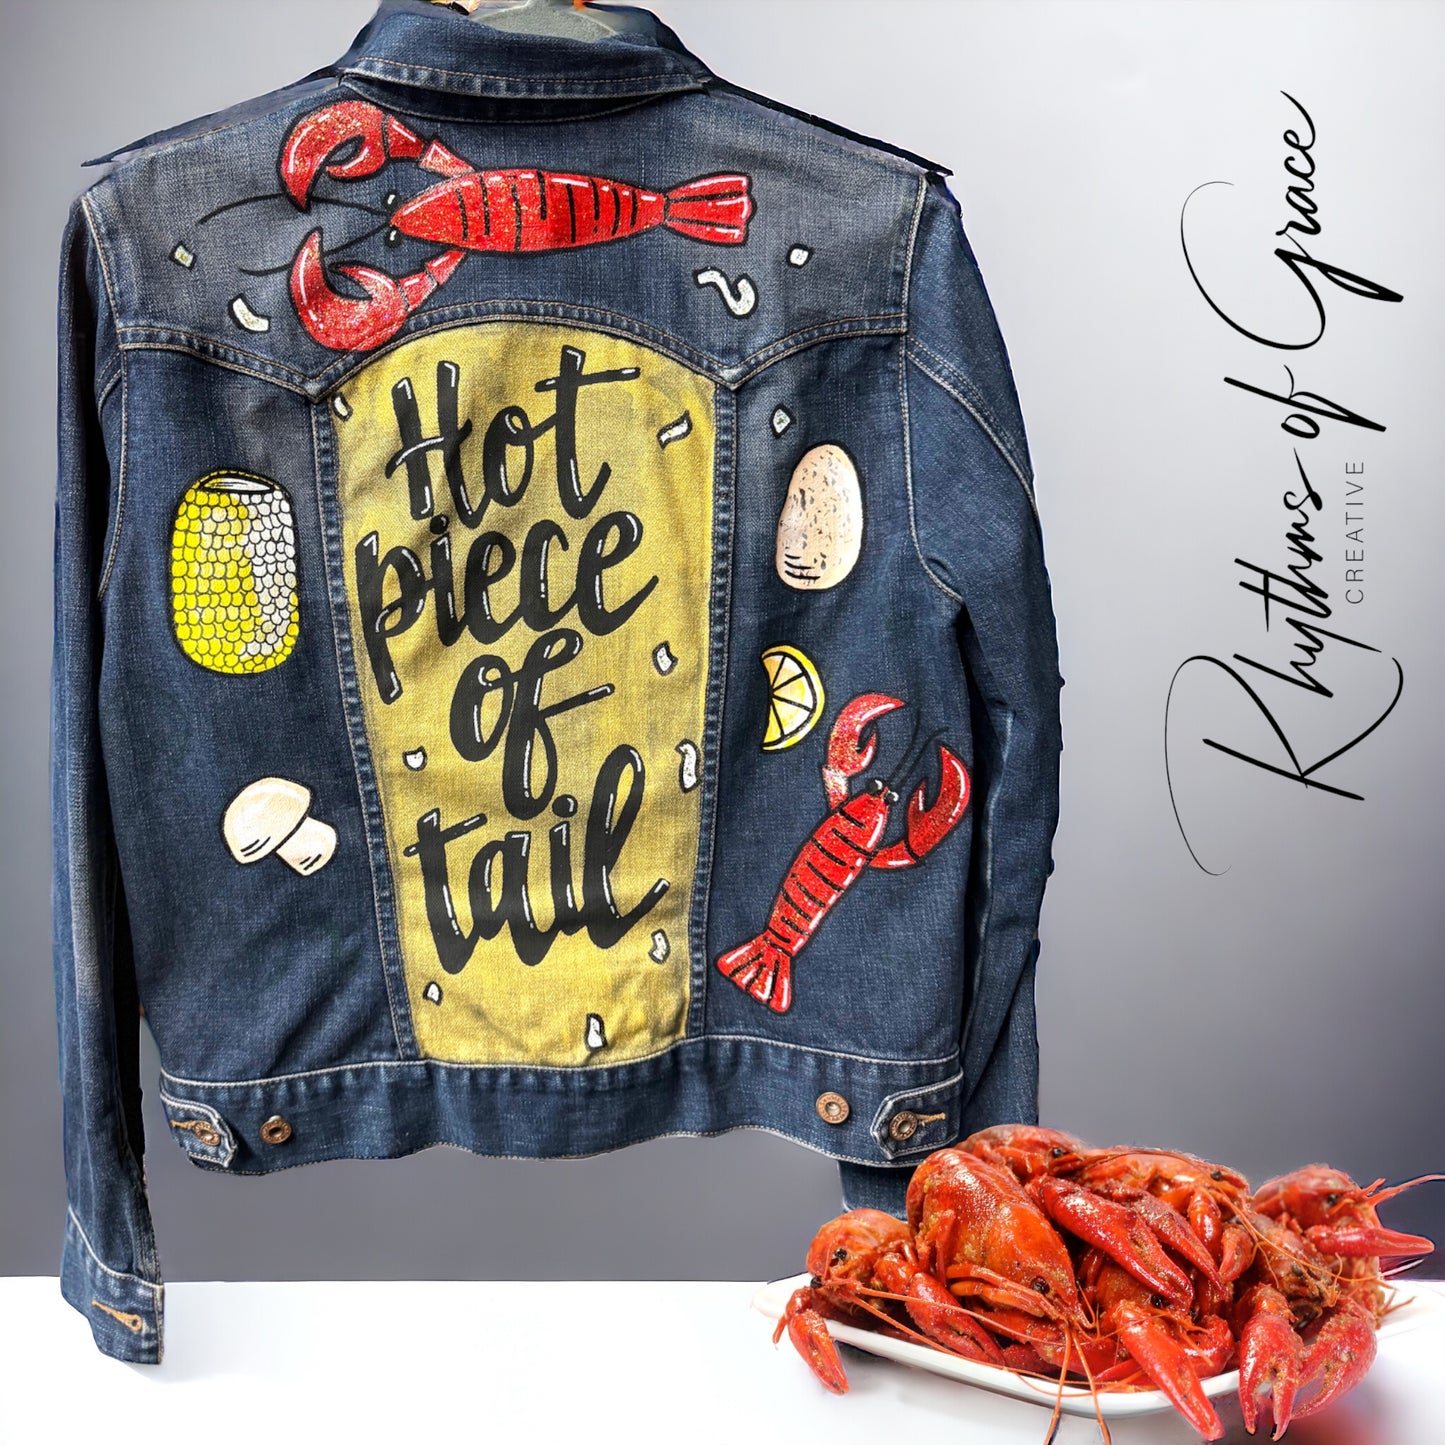 Hand Painted Jean Jacket: “Hot Piece of Tail”  - Cajun Jacket, Crawfish, Mardi Gras, Mardi Gras Jacket, New Orleans, Purple Green Gold, Mardi Gras, Parade Outfit